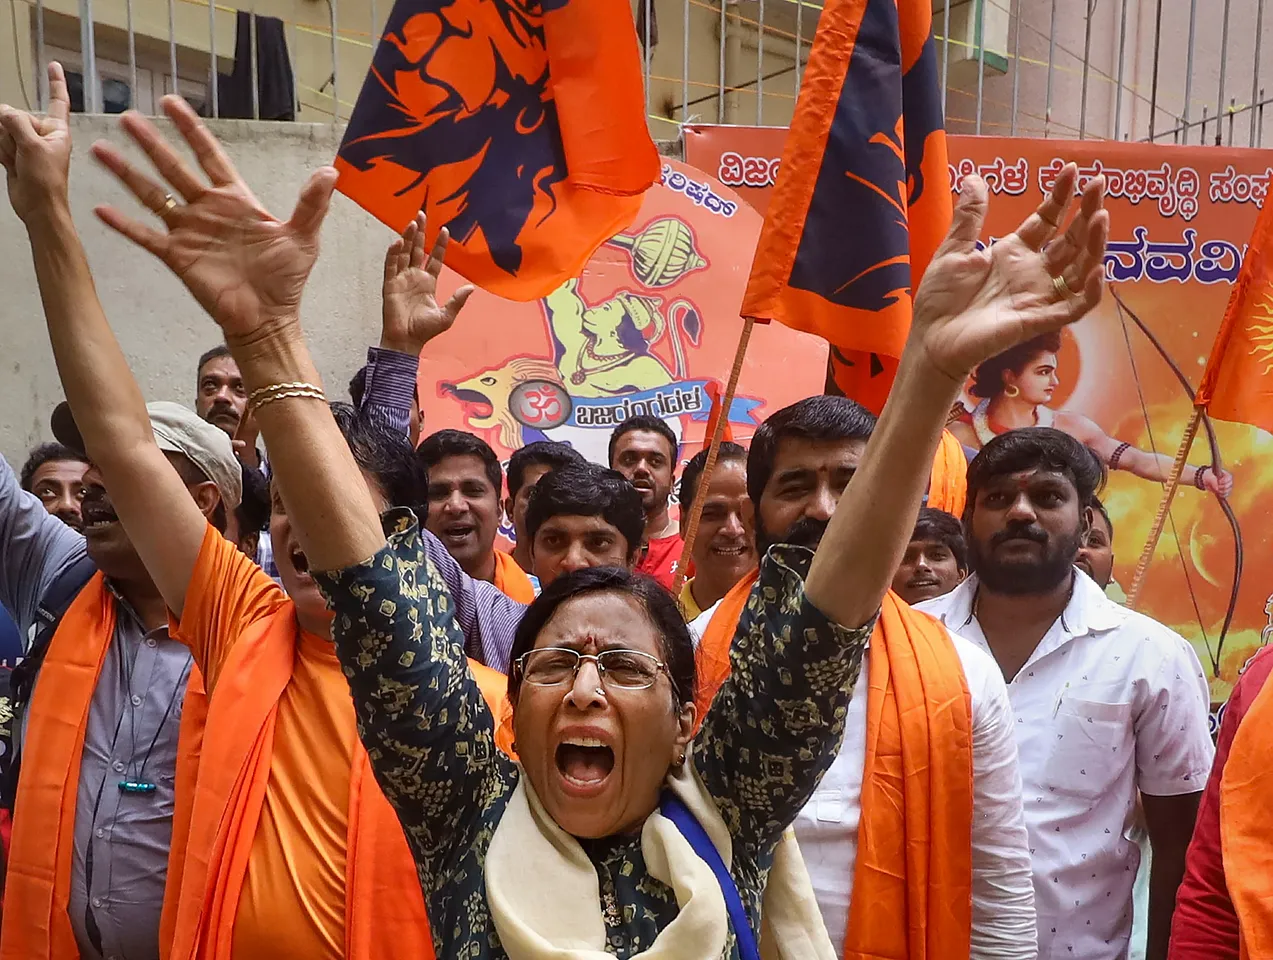 Bajrang Dal workers protest against Congress' manifesto for Karnataka elections, in Bengaluru